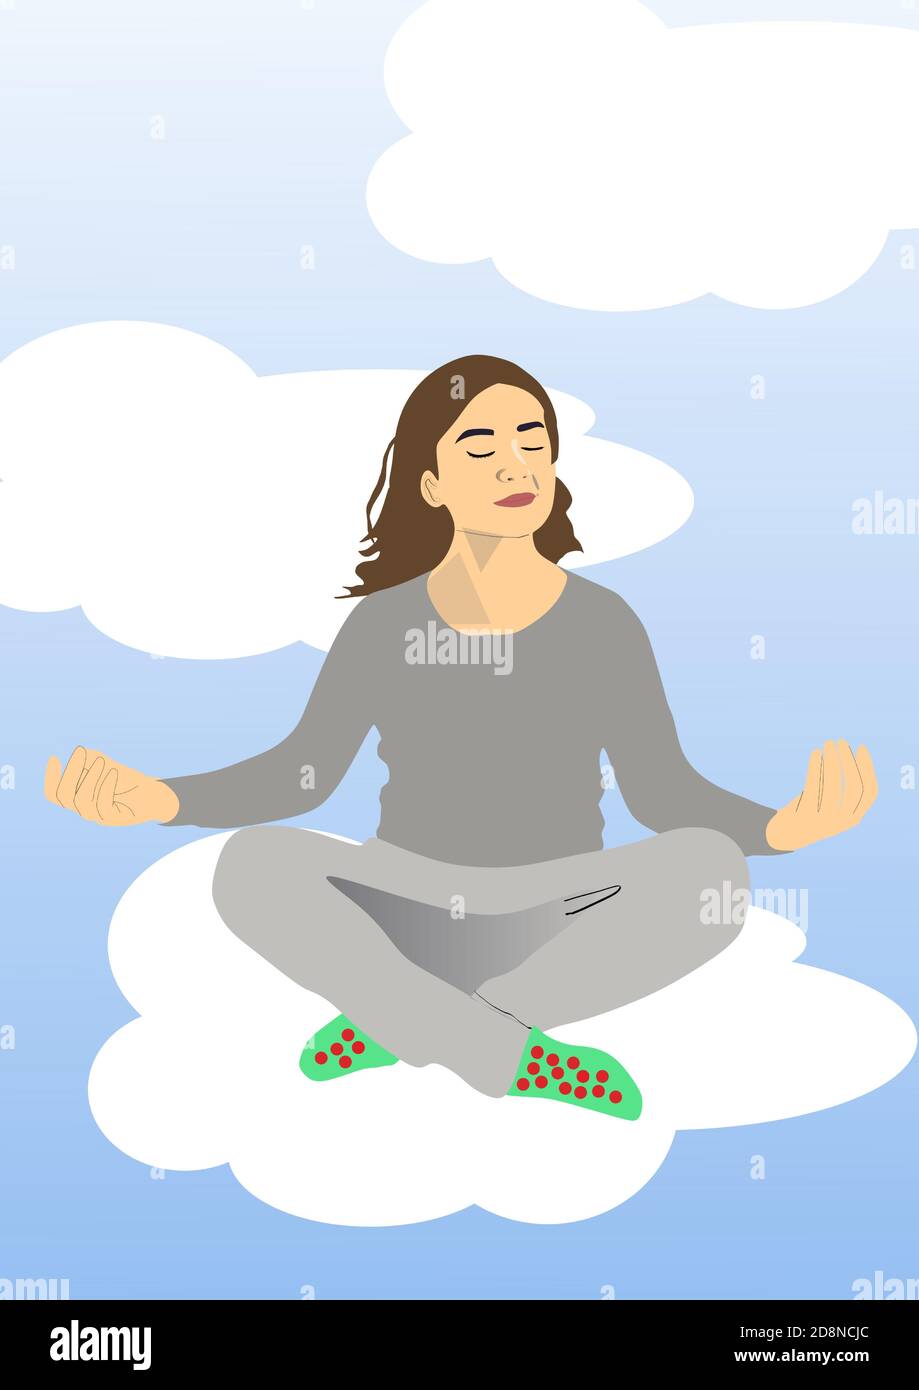 Woman in yoga position over clouds. Stock Vector